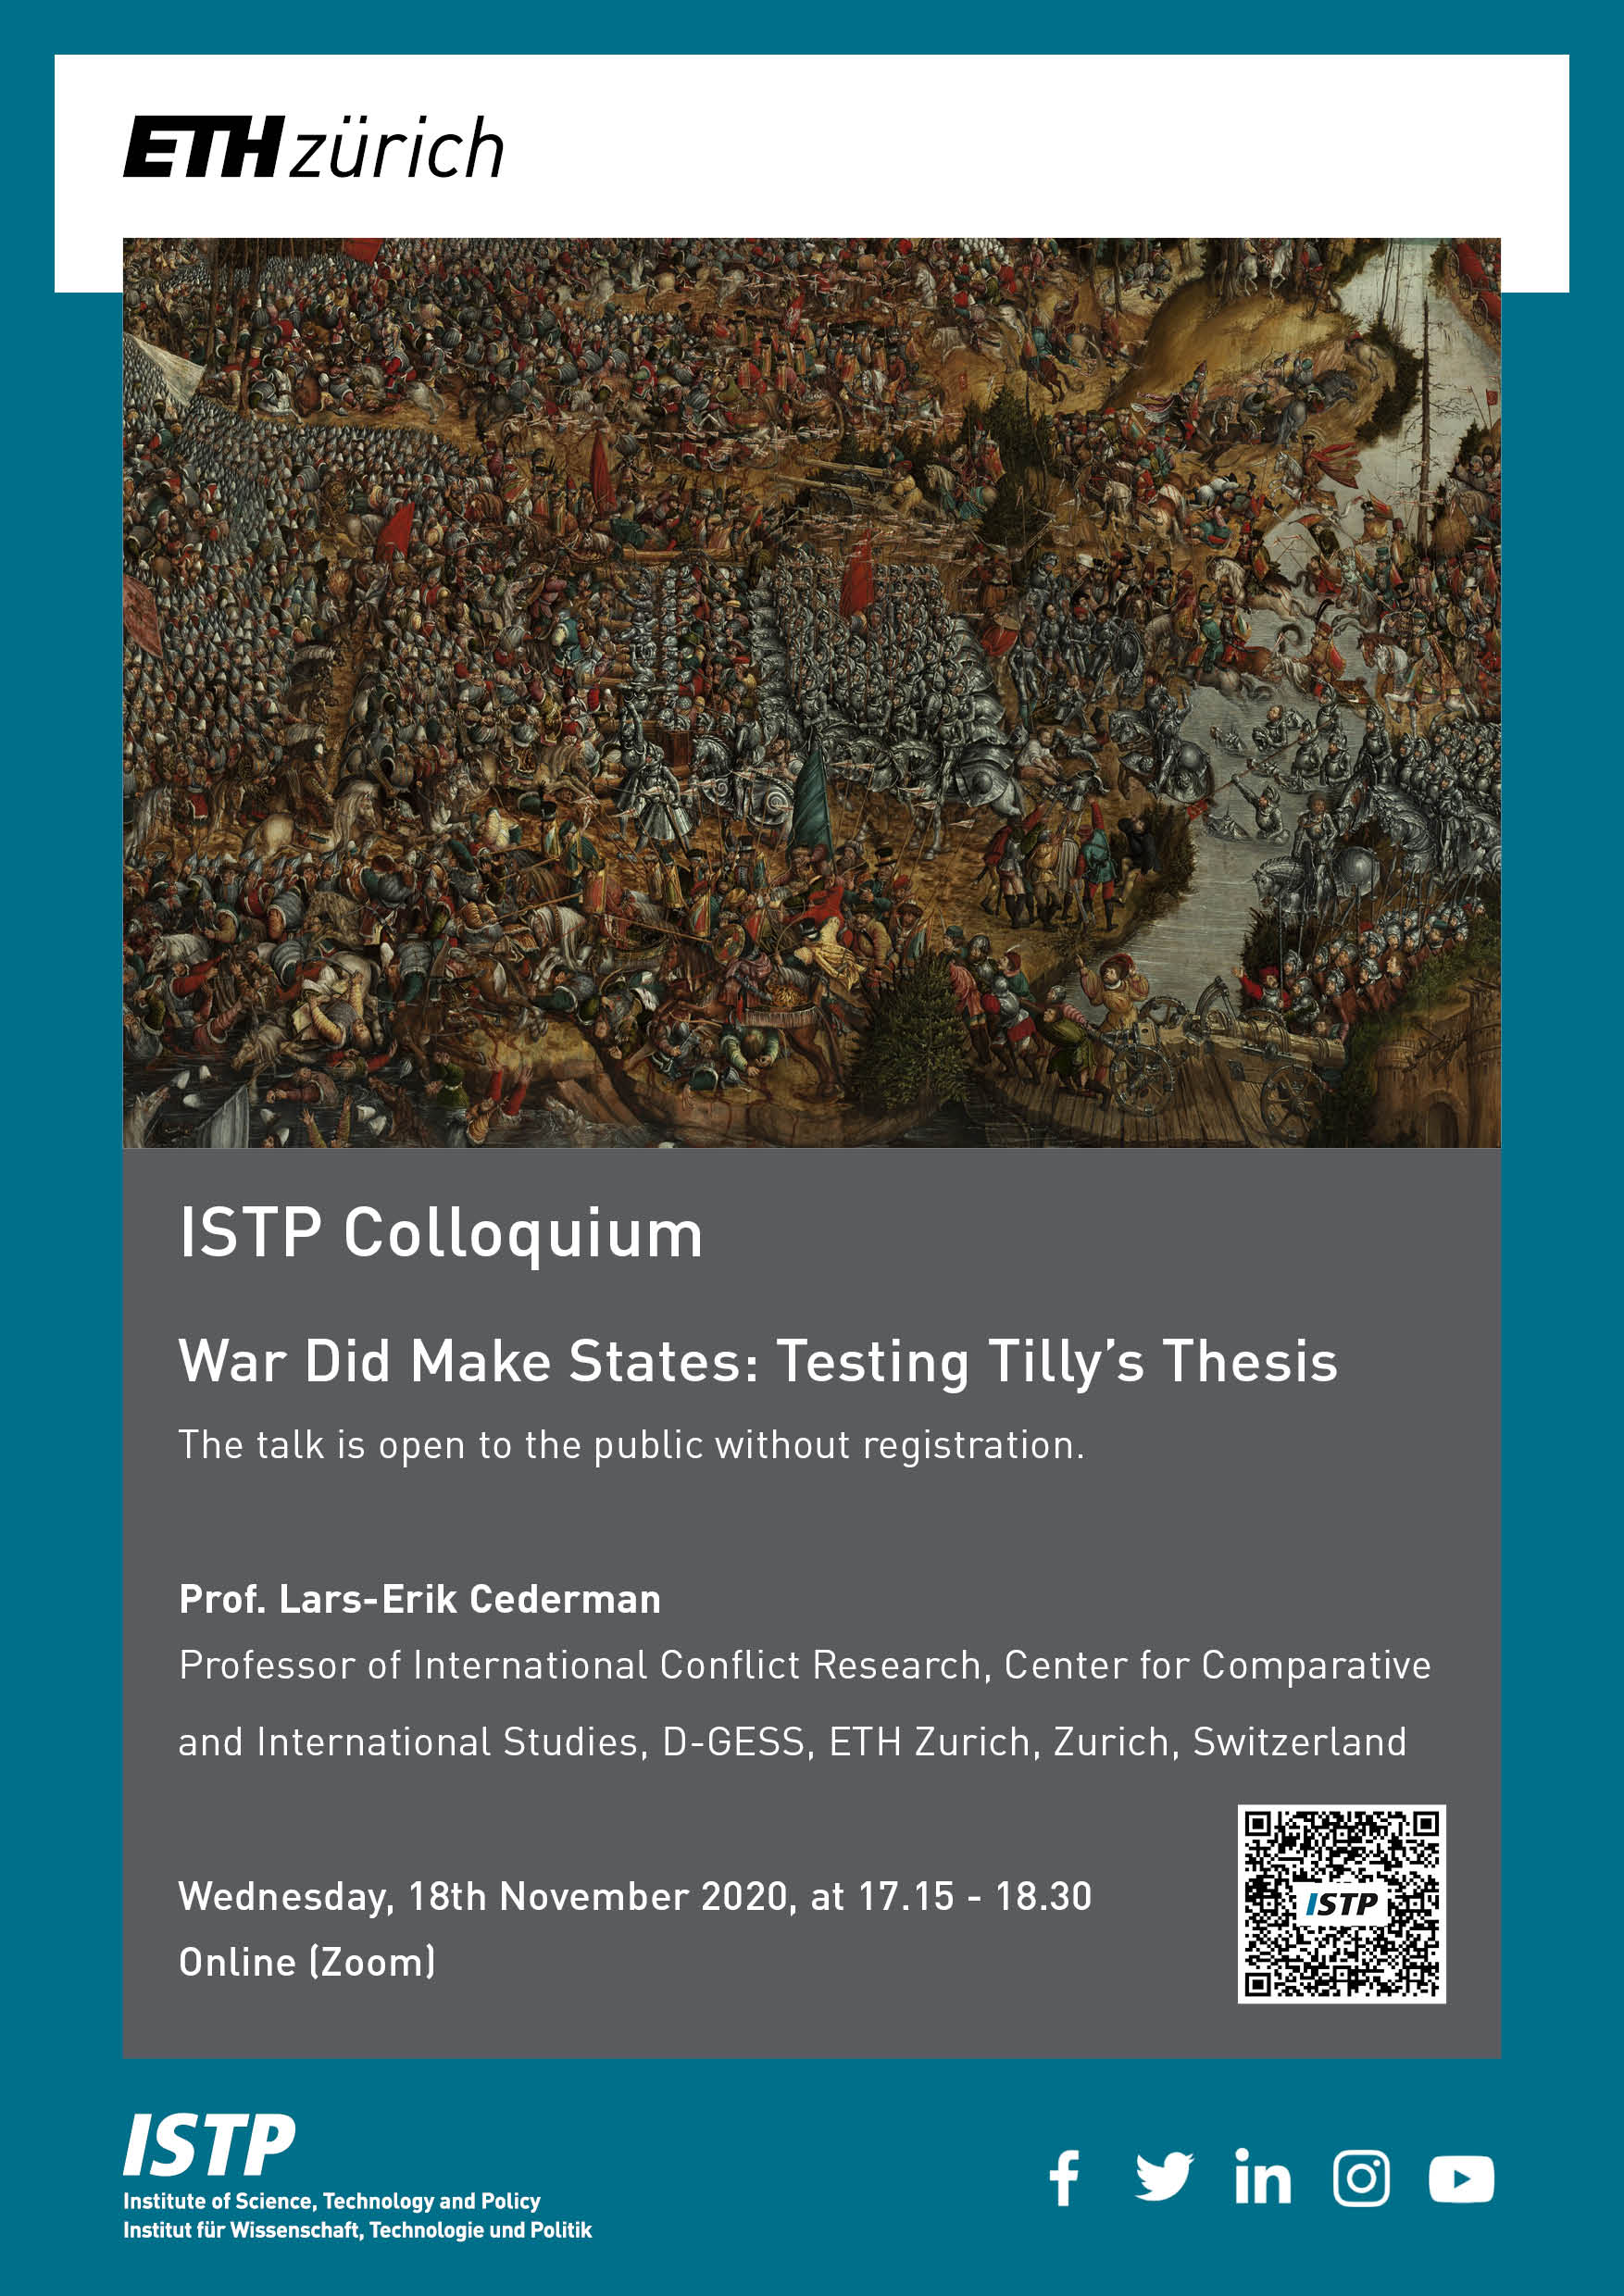 Enlarged view: ISTP Colloquium: War Did Make States - Testing Tilly’s Thesis